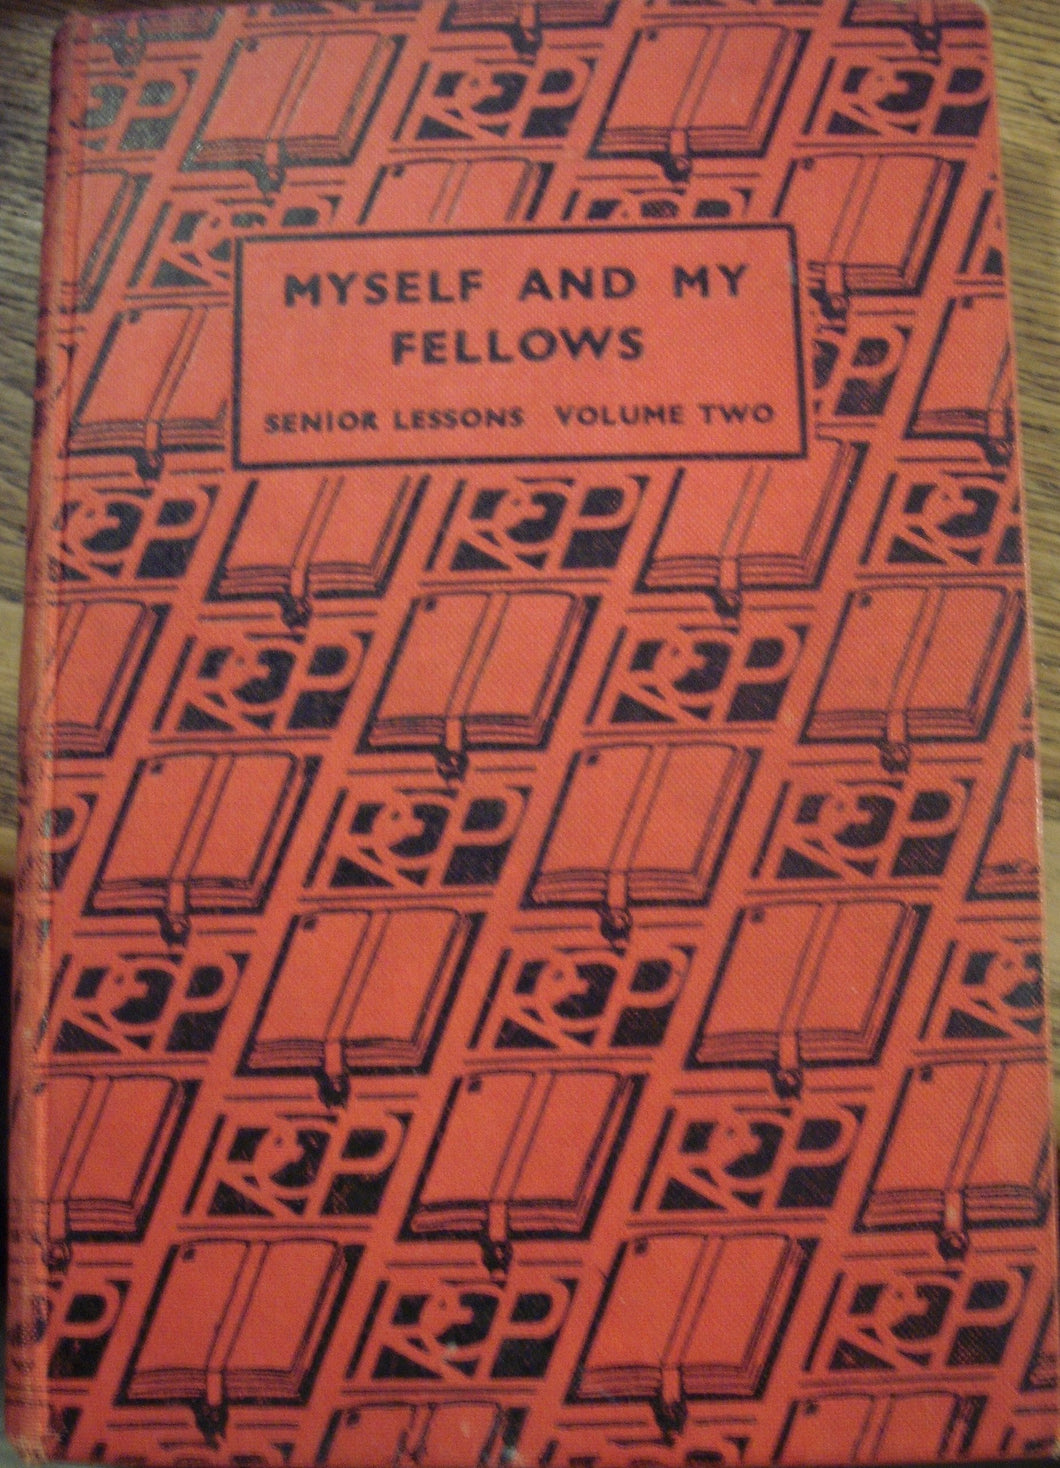 Myself and My Fellows Senior Lessons on the Agreed Syllabuses - VOLUME TWO (Fourth Revised Edition) [Hardcover] Cox, L E and Hayes, E H